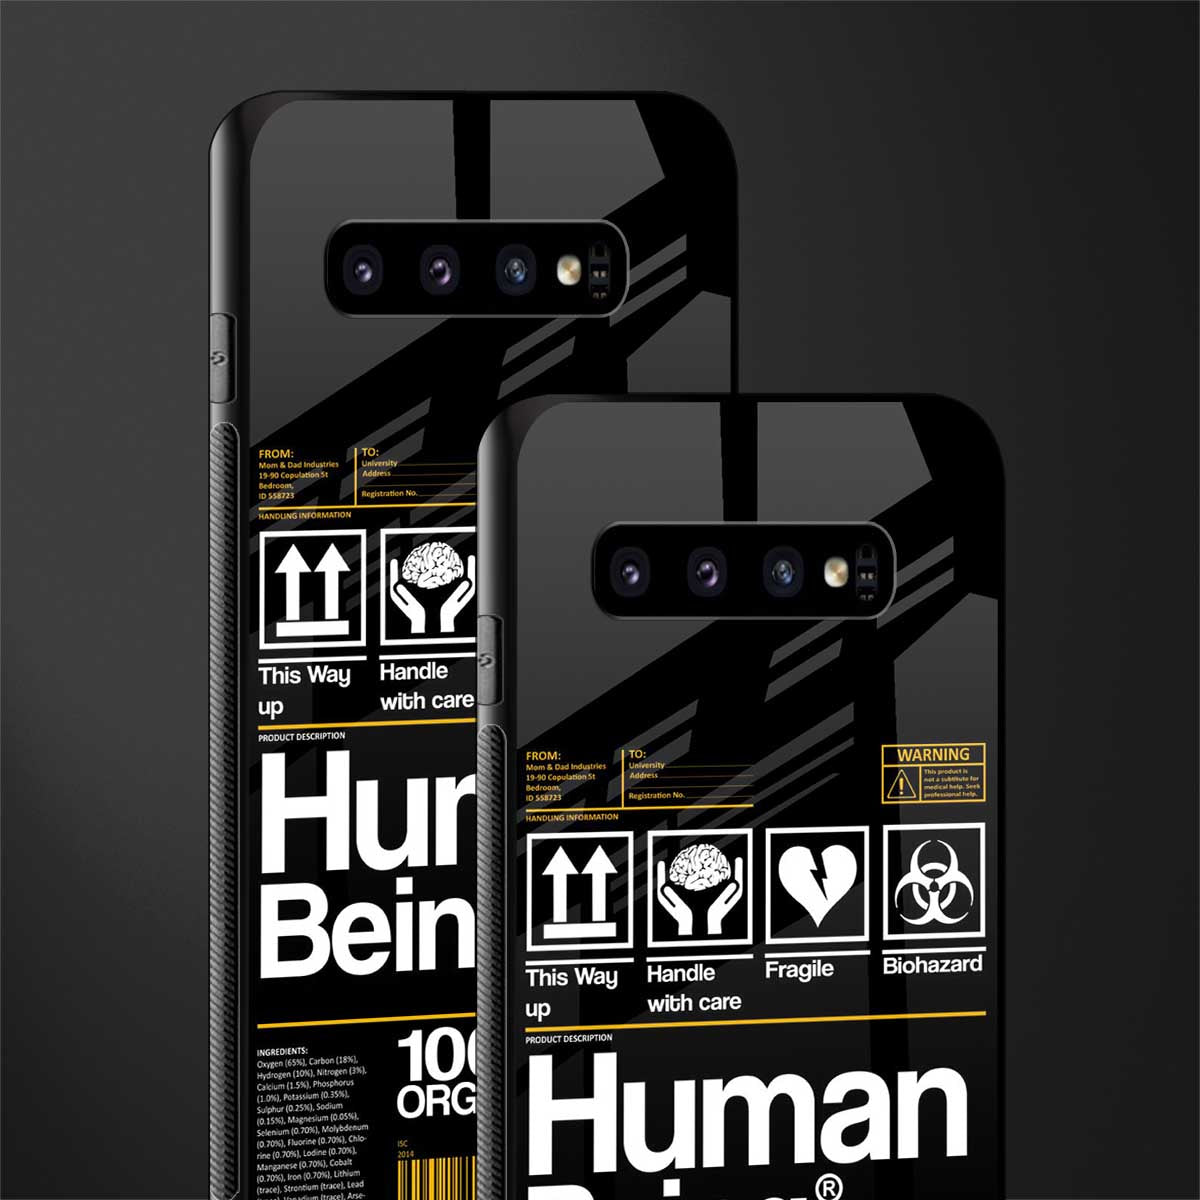 human being label phone cover for samsung galaxy s10 plus